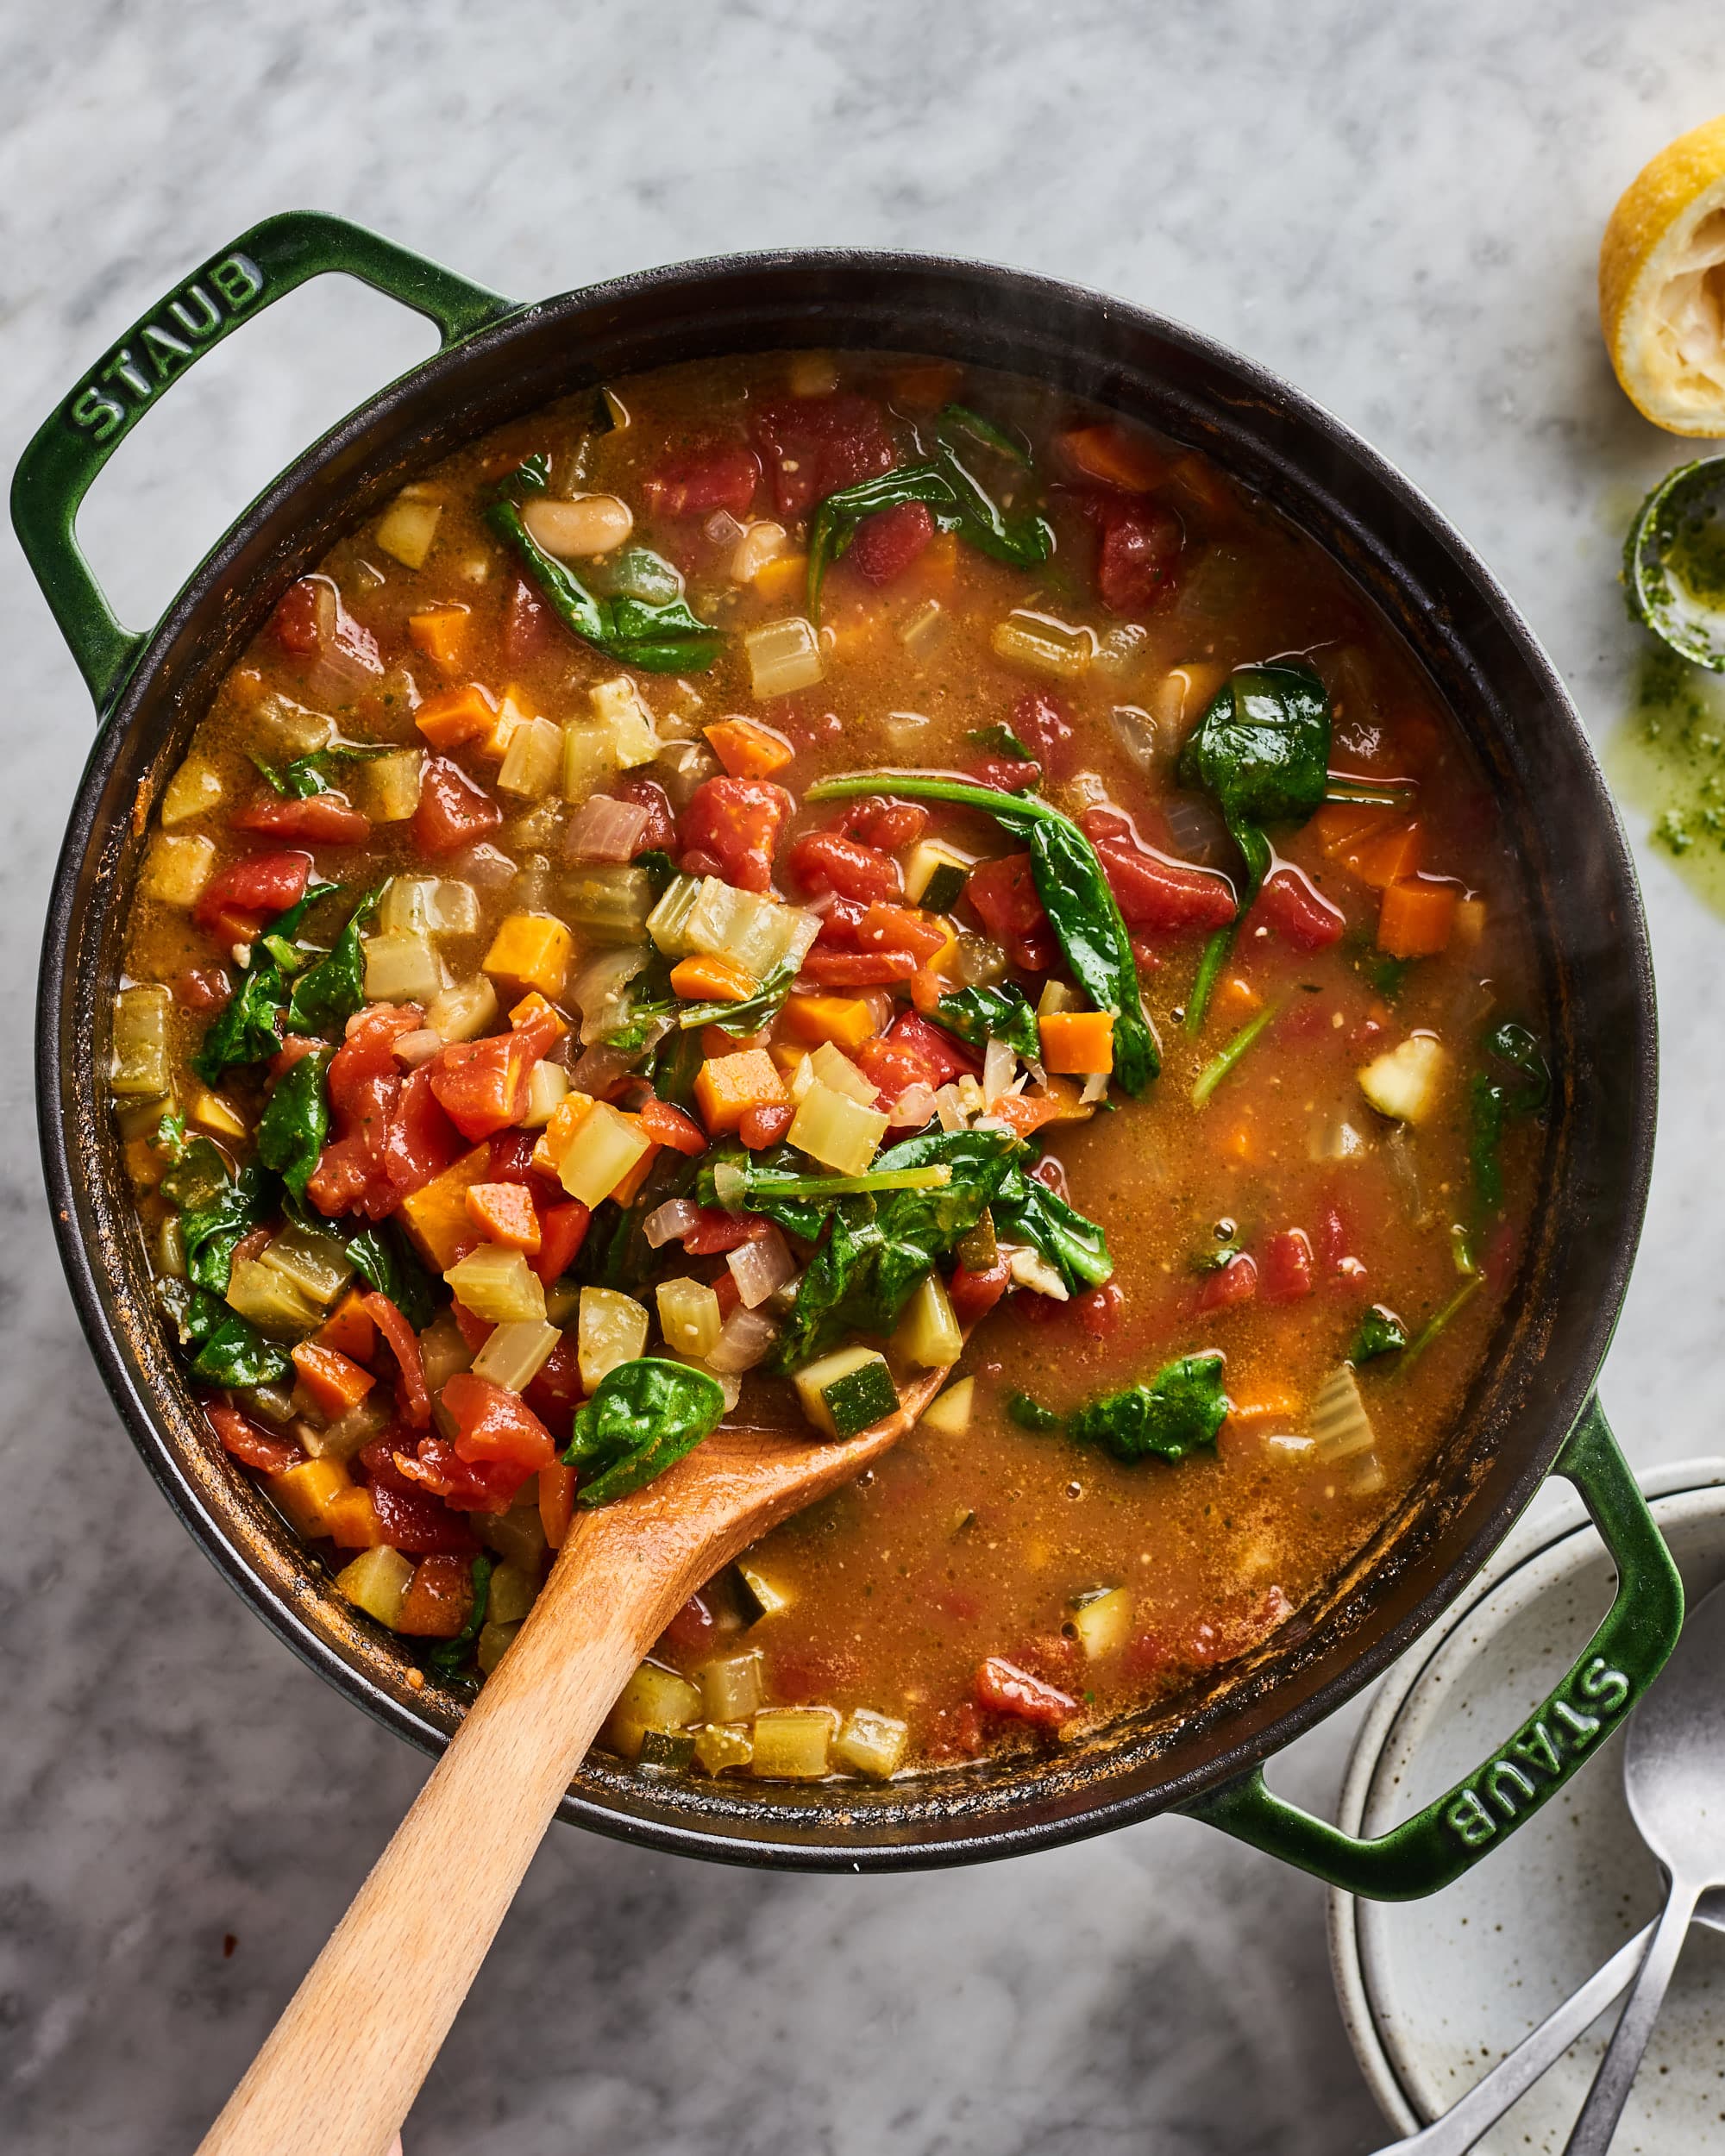 https://cdn.apartmenttherapy.info/image/upload/v1574458992/k/Photo/Recipes/2019-12-How-To-Classic-Minestrone-Soup/HT-Classic-Minestrone-Soup_035.jpg